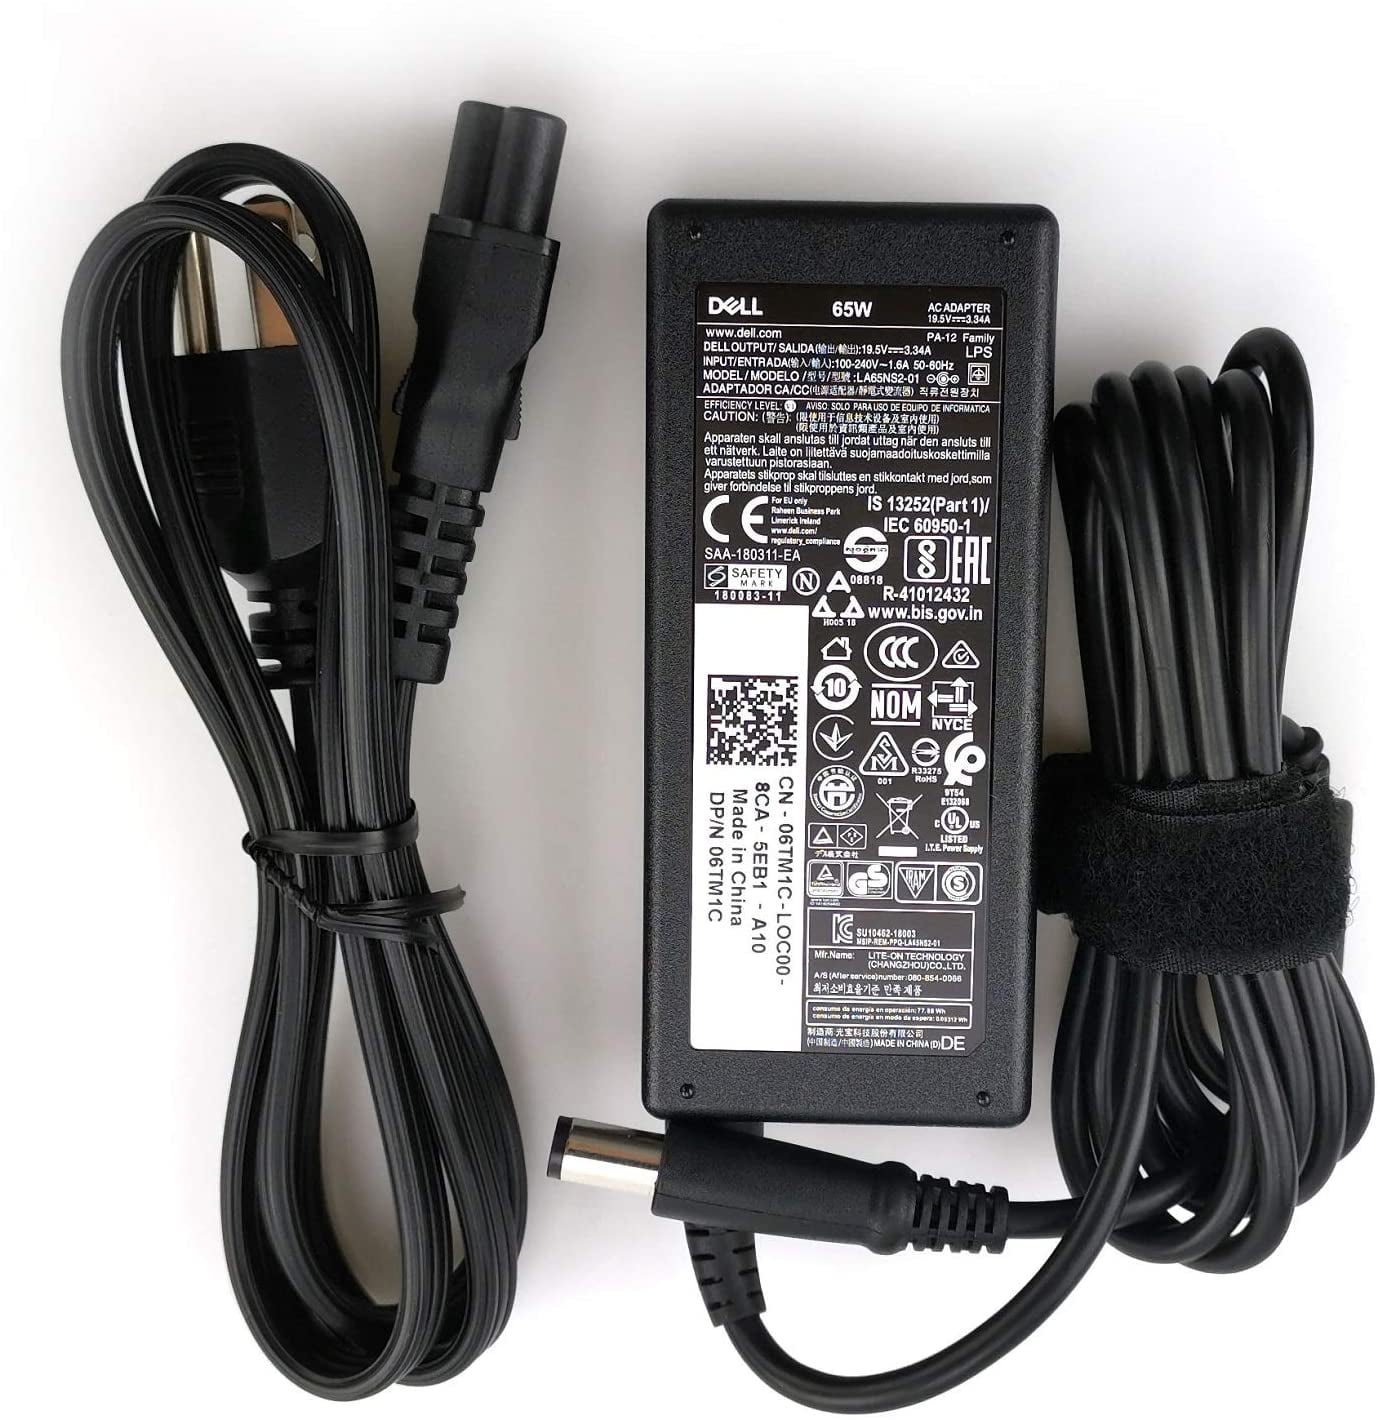 Dell Laptop AC Adapter Charger 65 Watt   LA65NS2-01 Compatible  with 09RN2C 6TM1C HA65NS5-00 A065R039L  Tip By UpBright 